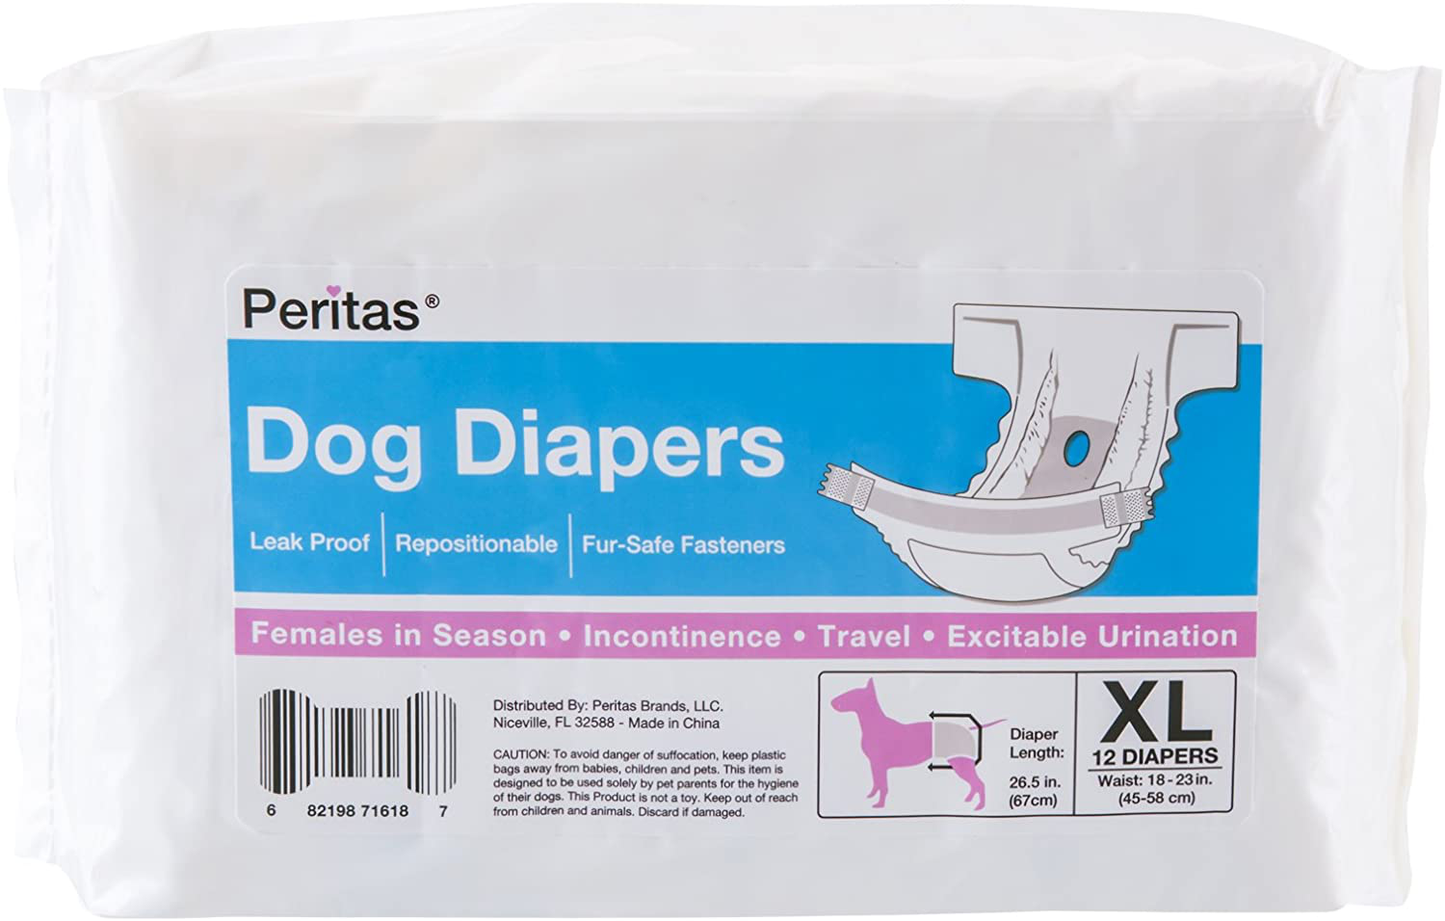 Peritas Disposable Large/Xlarge Dog Diapers | Female Dog Diapers |Puppy Diapers, Diapers for Dogs in Heat, or Dog Incontinence Diapers